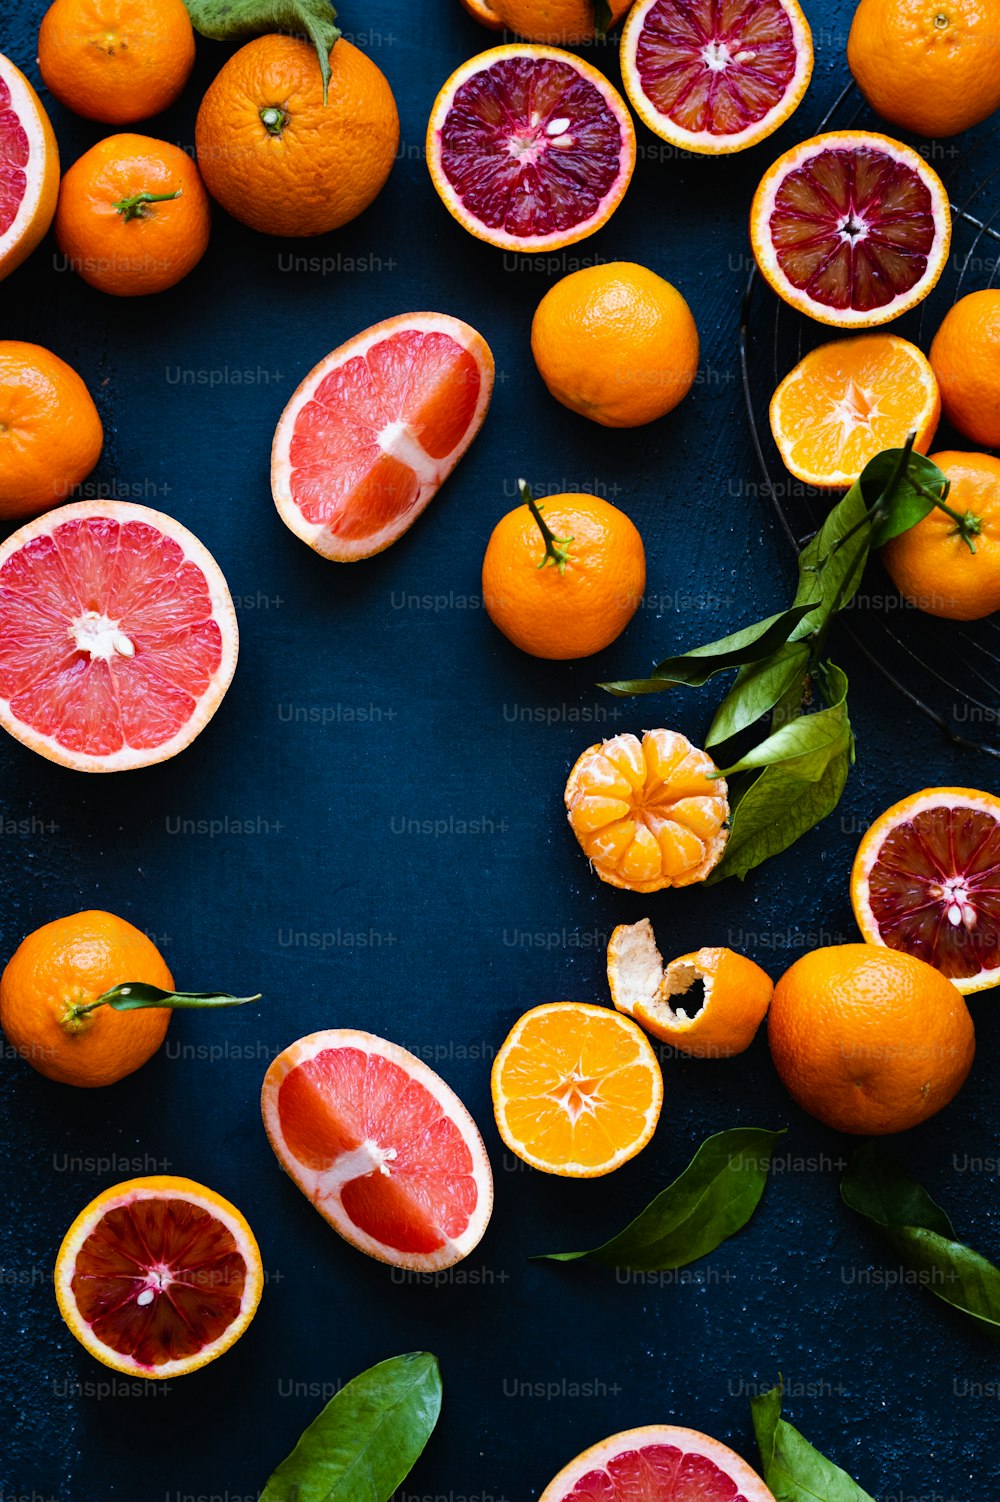 a group of grapefruits and oranges on a blue surface